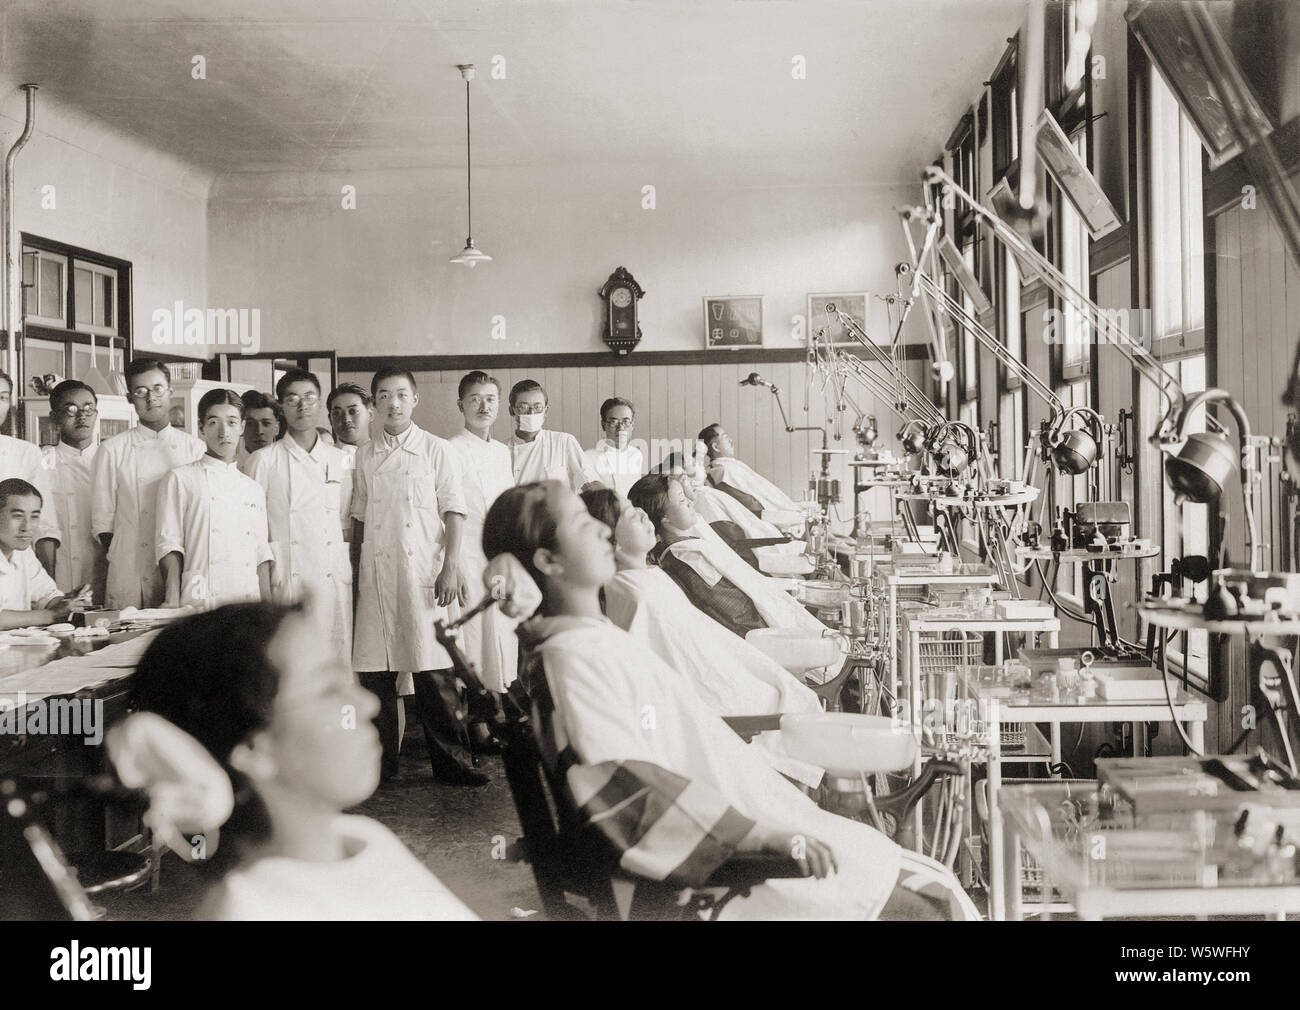 [ 1910s Japan - Japanese Dental Clinic ] —   Students, patients and dental equipment at the student clinic of a Japanese dental school, ca. 1910 (Meiji 43).  20th century vintage gelatin silver print. Stock Photo